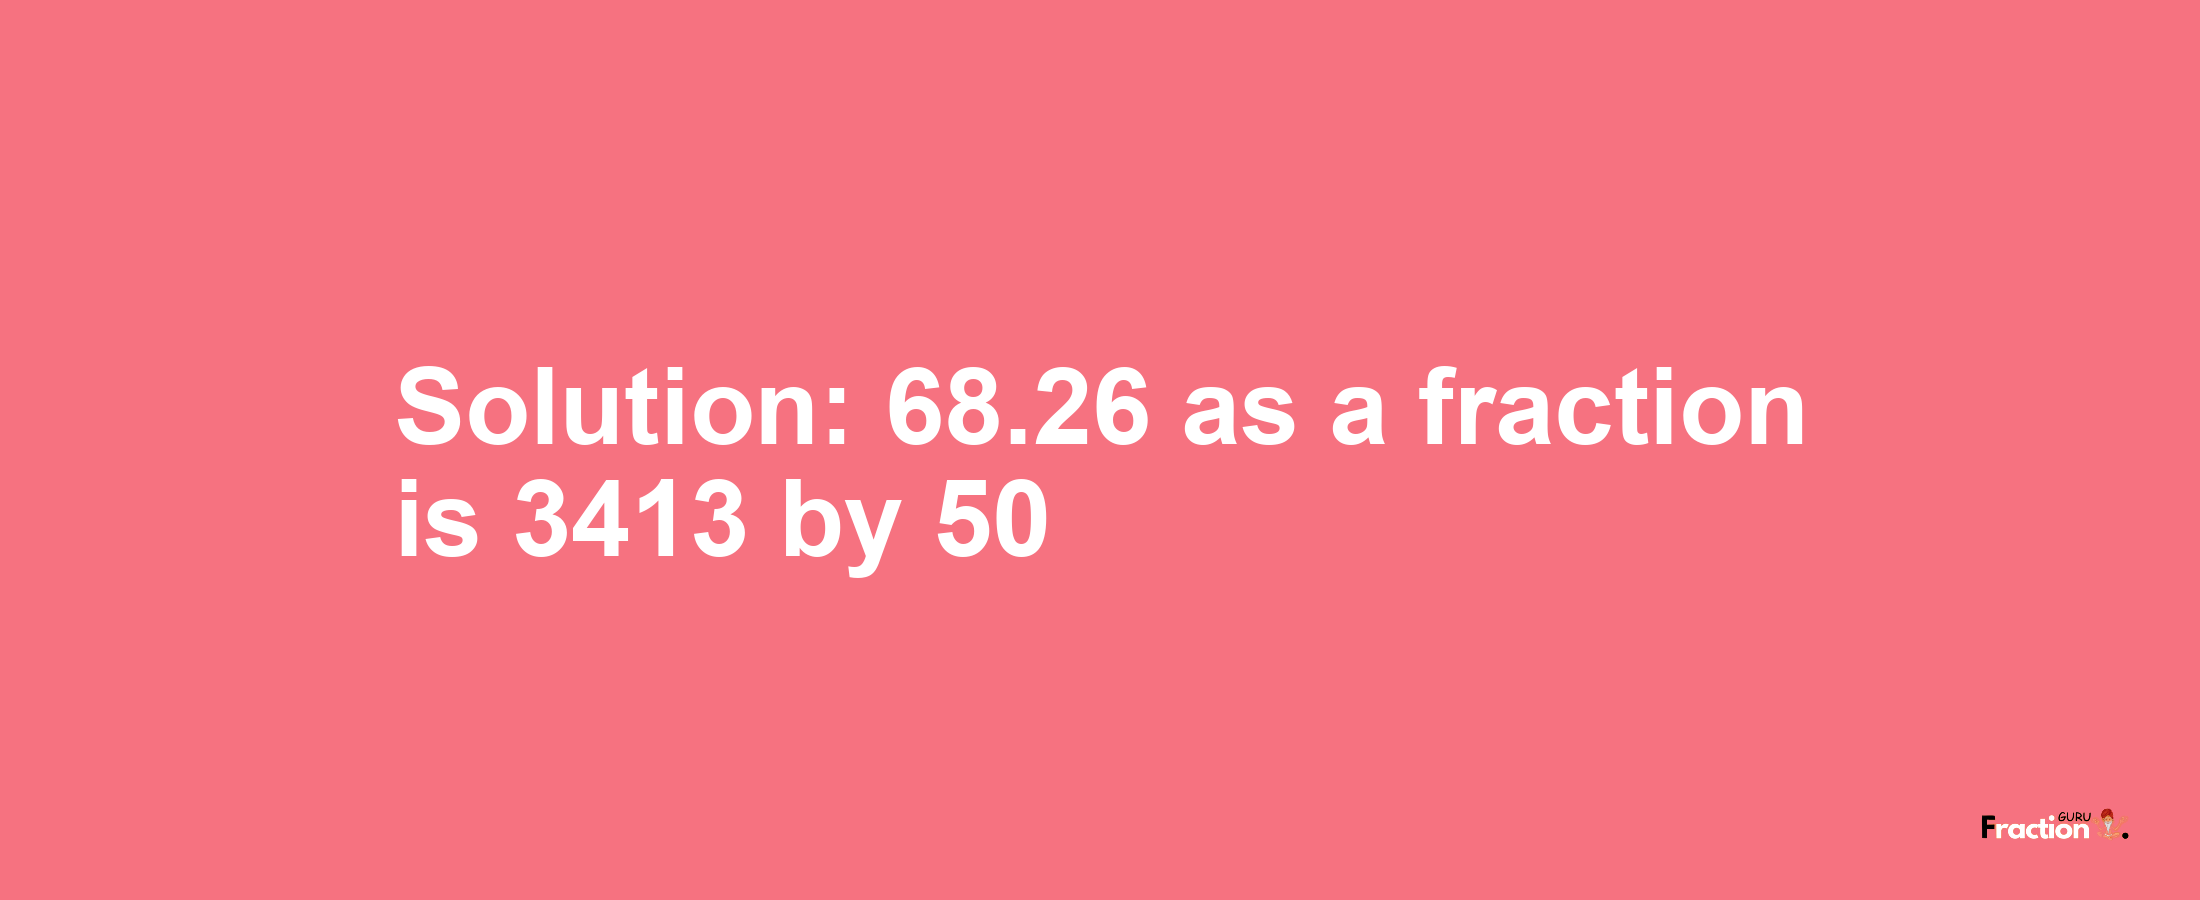 Solution:68.26 as a fraction is 3413/50